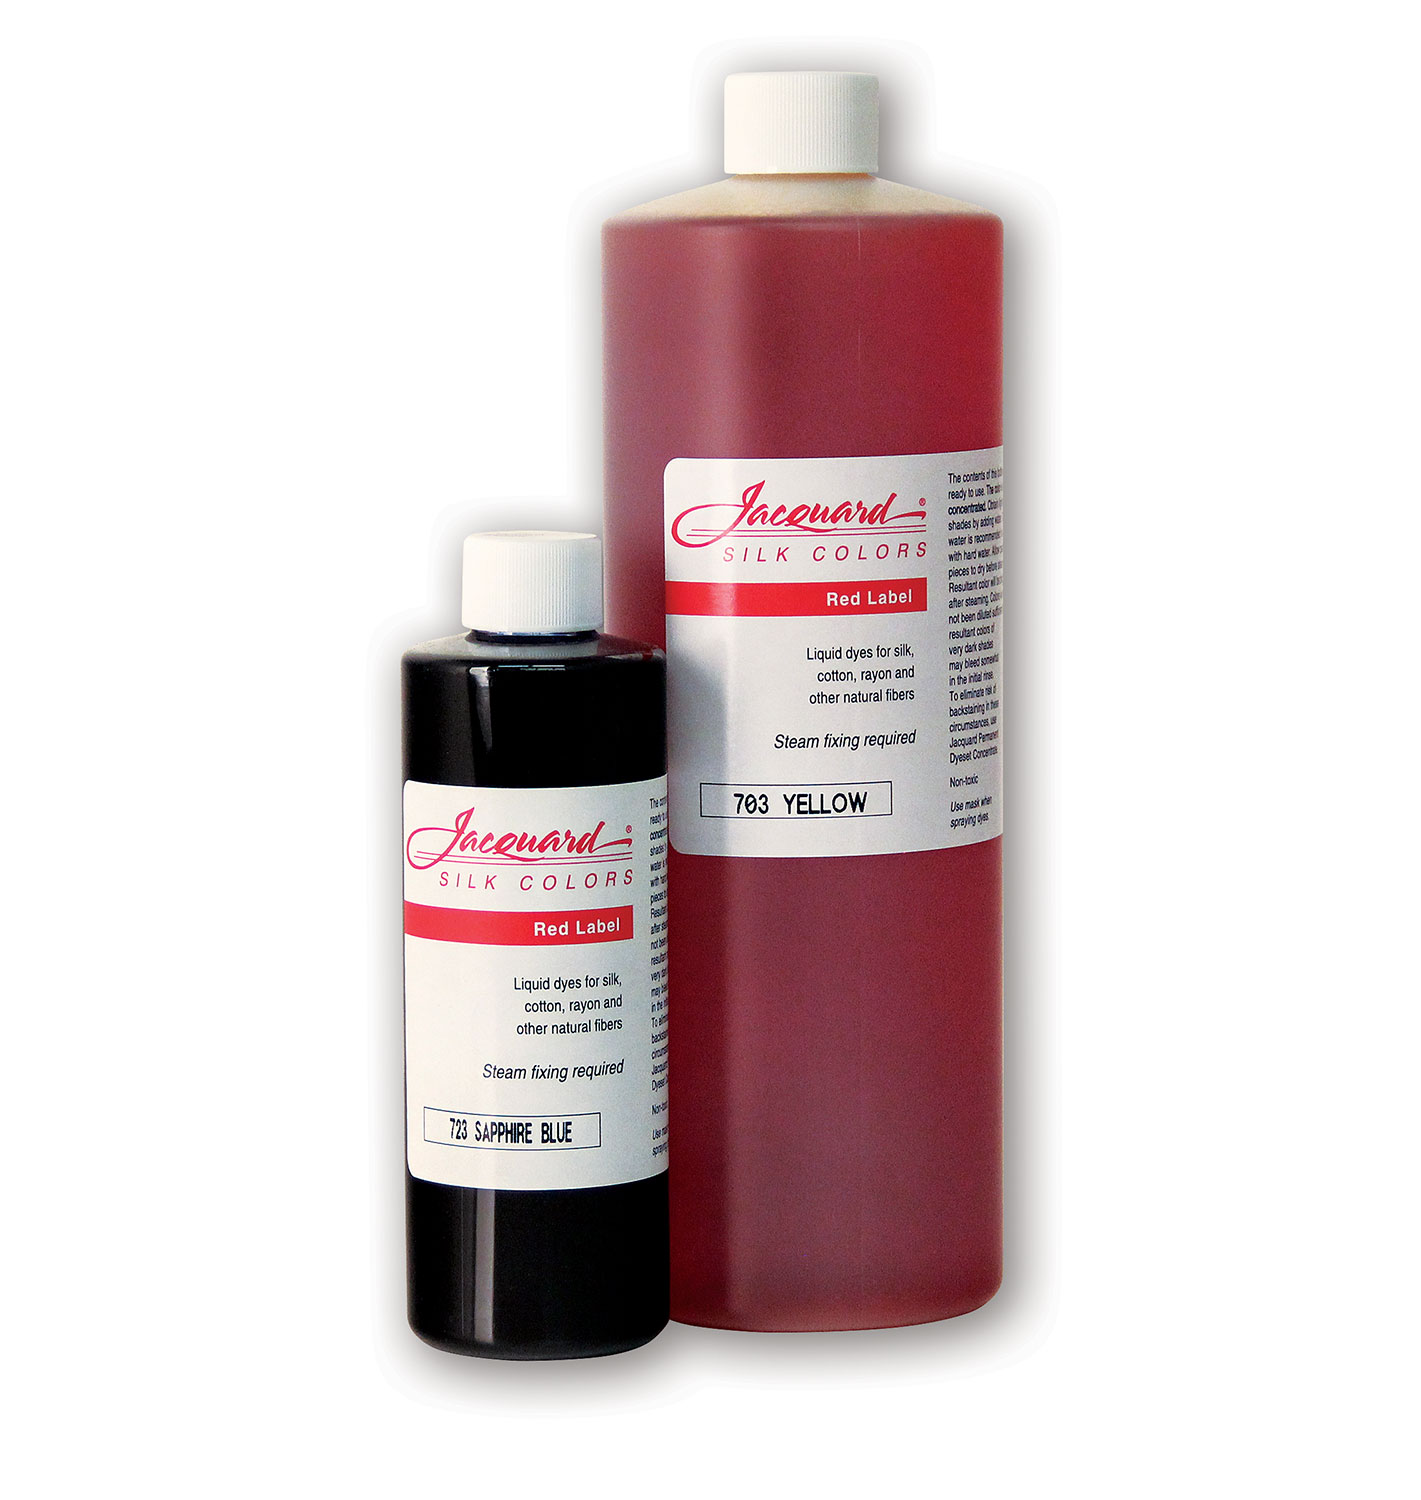 Rainbow Silks : Jacquard Synthrapol 236ml in Chemicals for use